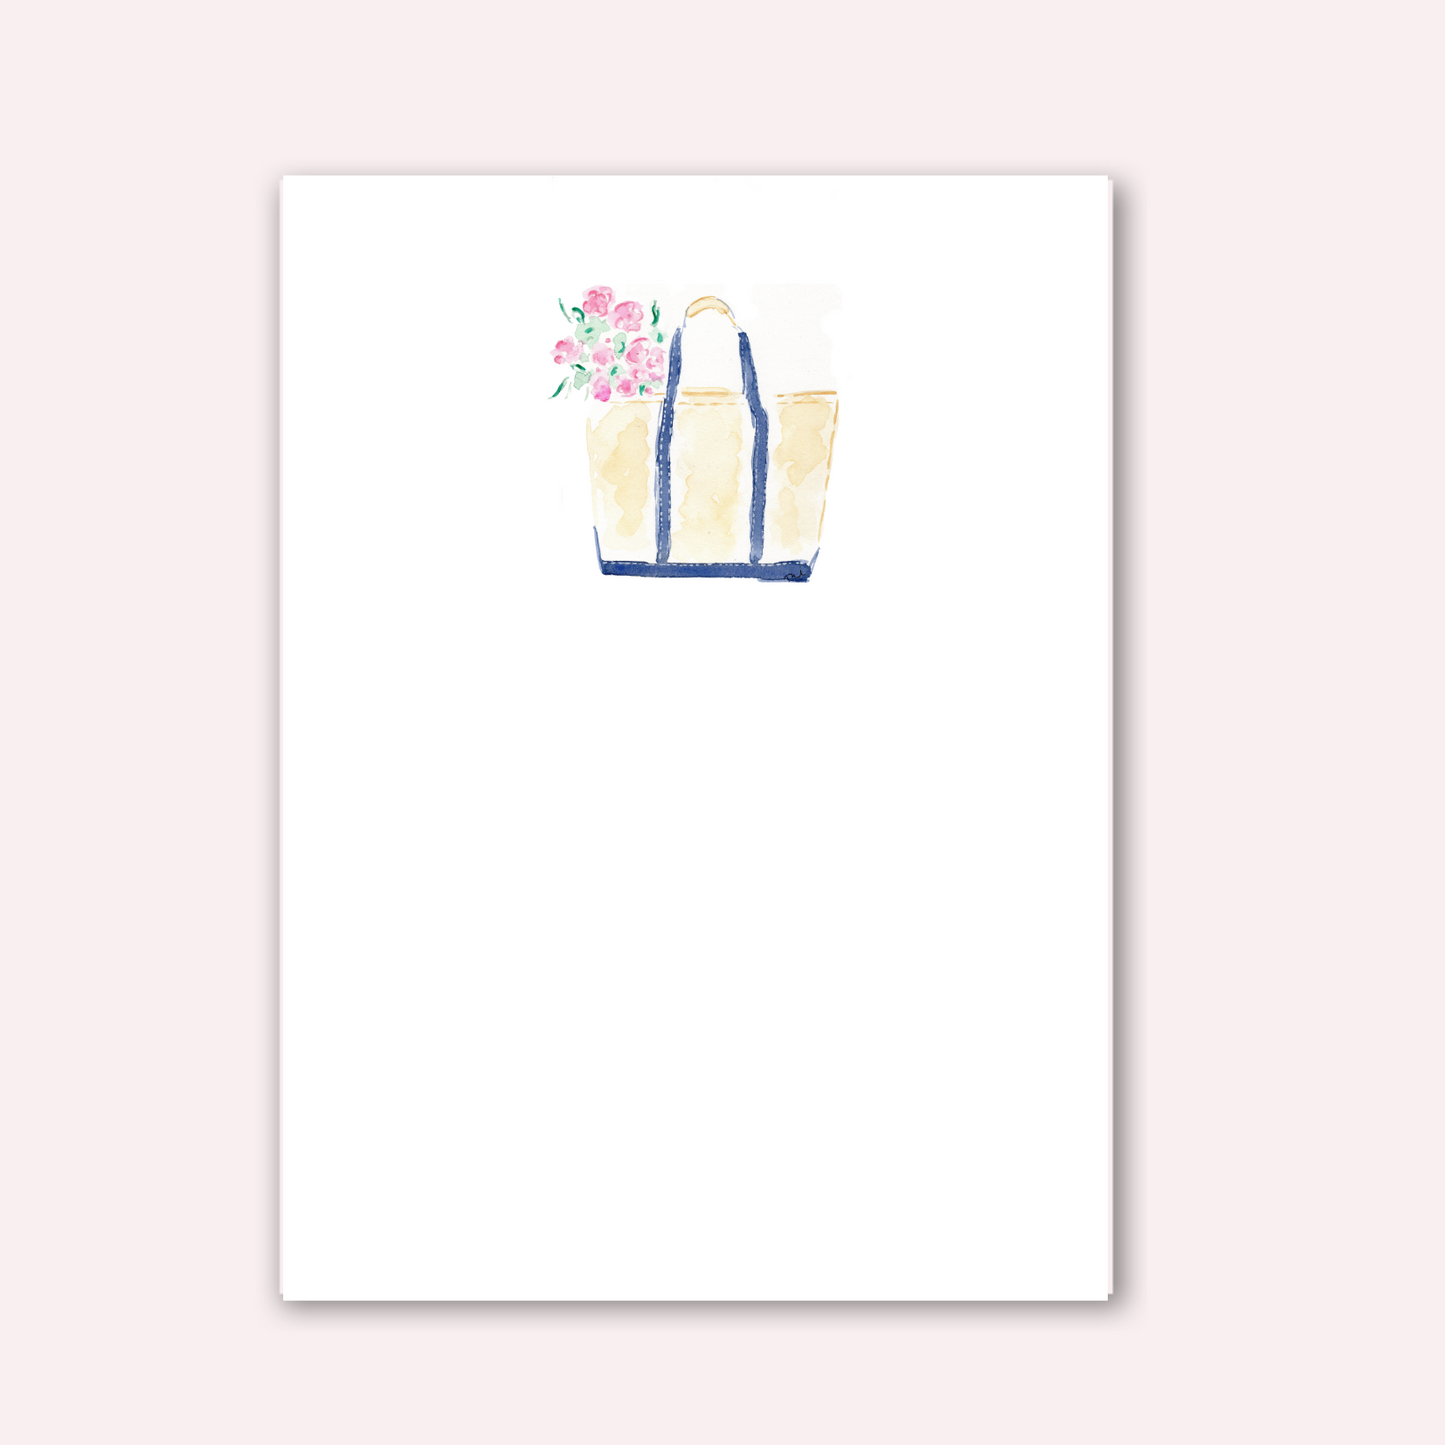 Watercolor boat and tote bag on a white notepad